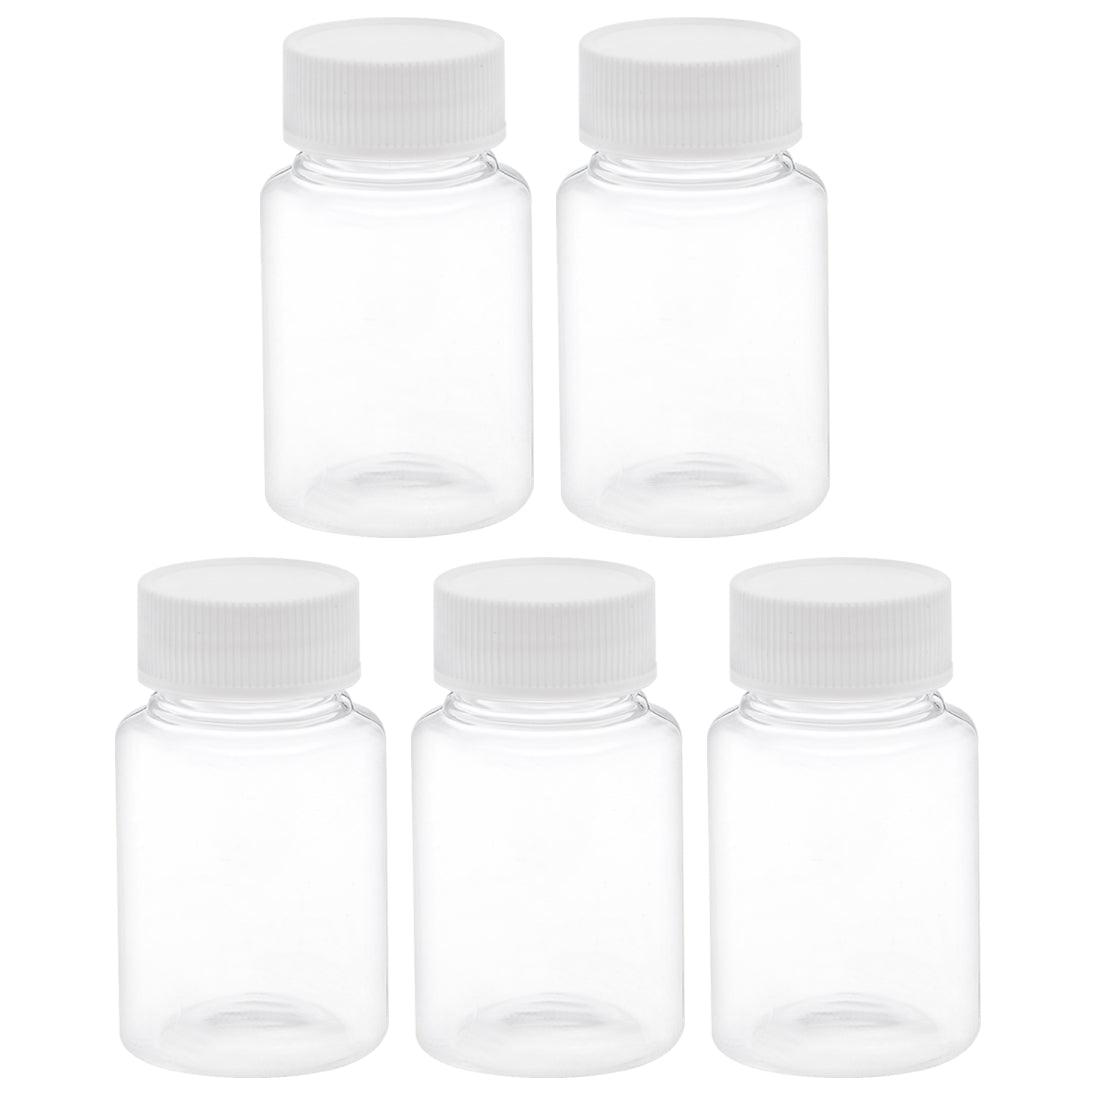 Uxcell Uxcell 3.4 oz/100ml PET Plastic Lab Chemical Reagent Bottle Wide Mouth Liquid/ Solid Storage Container Clear Bottles w Tamper Evident Caps 5pcs